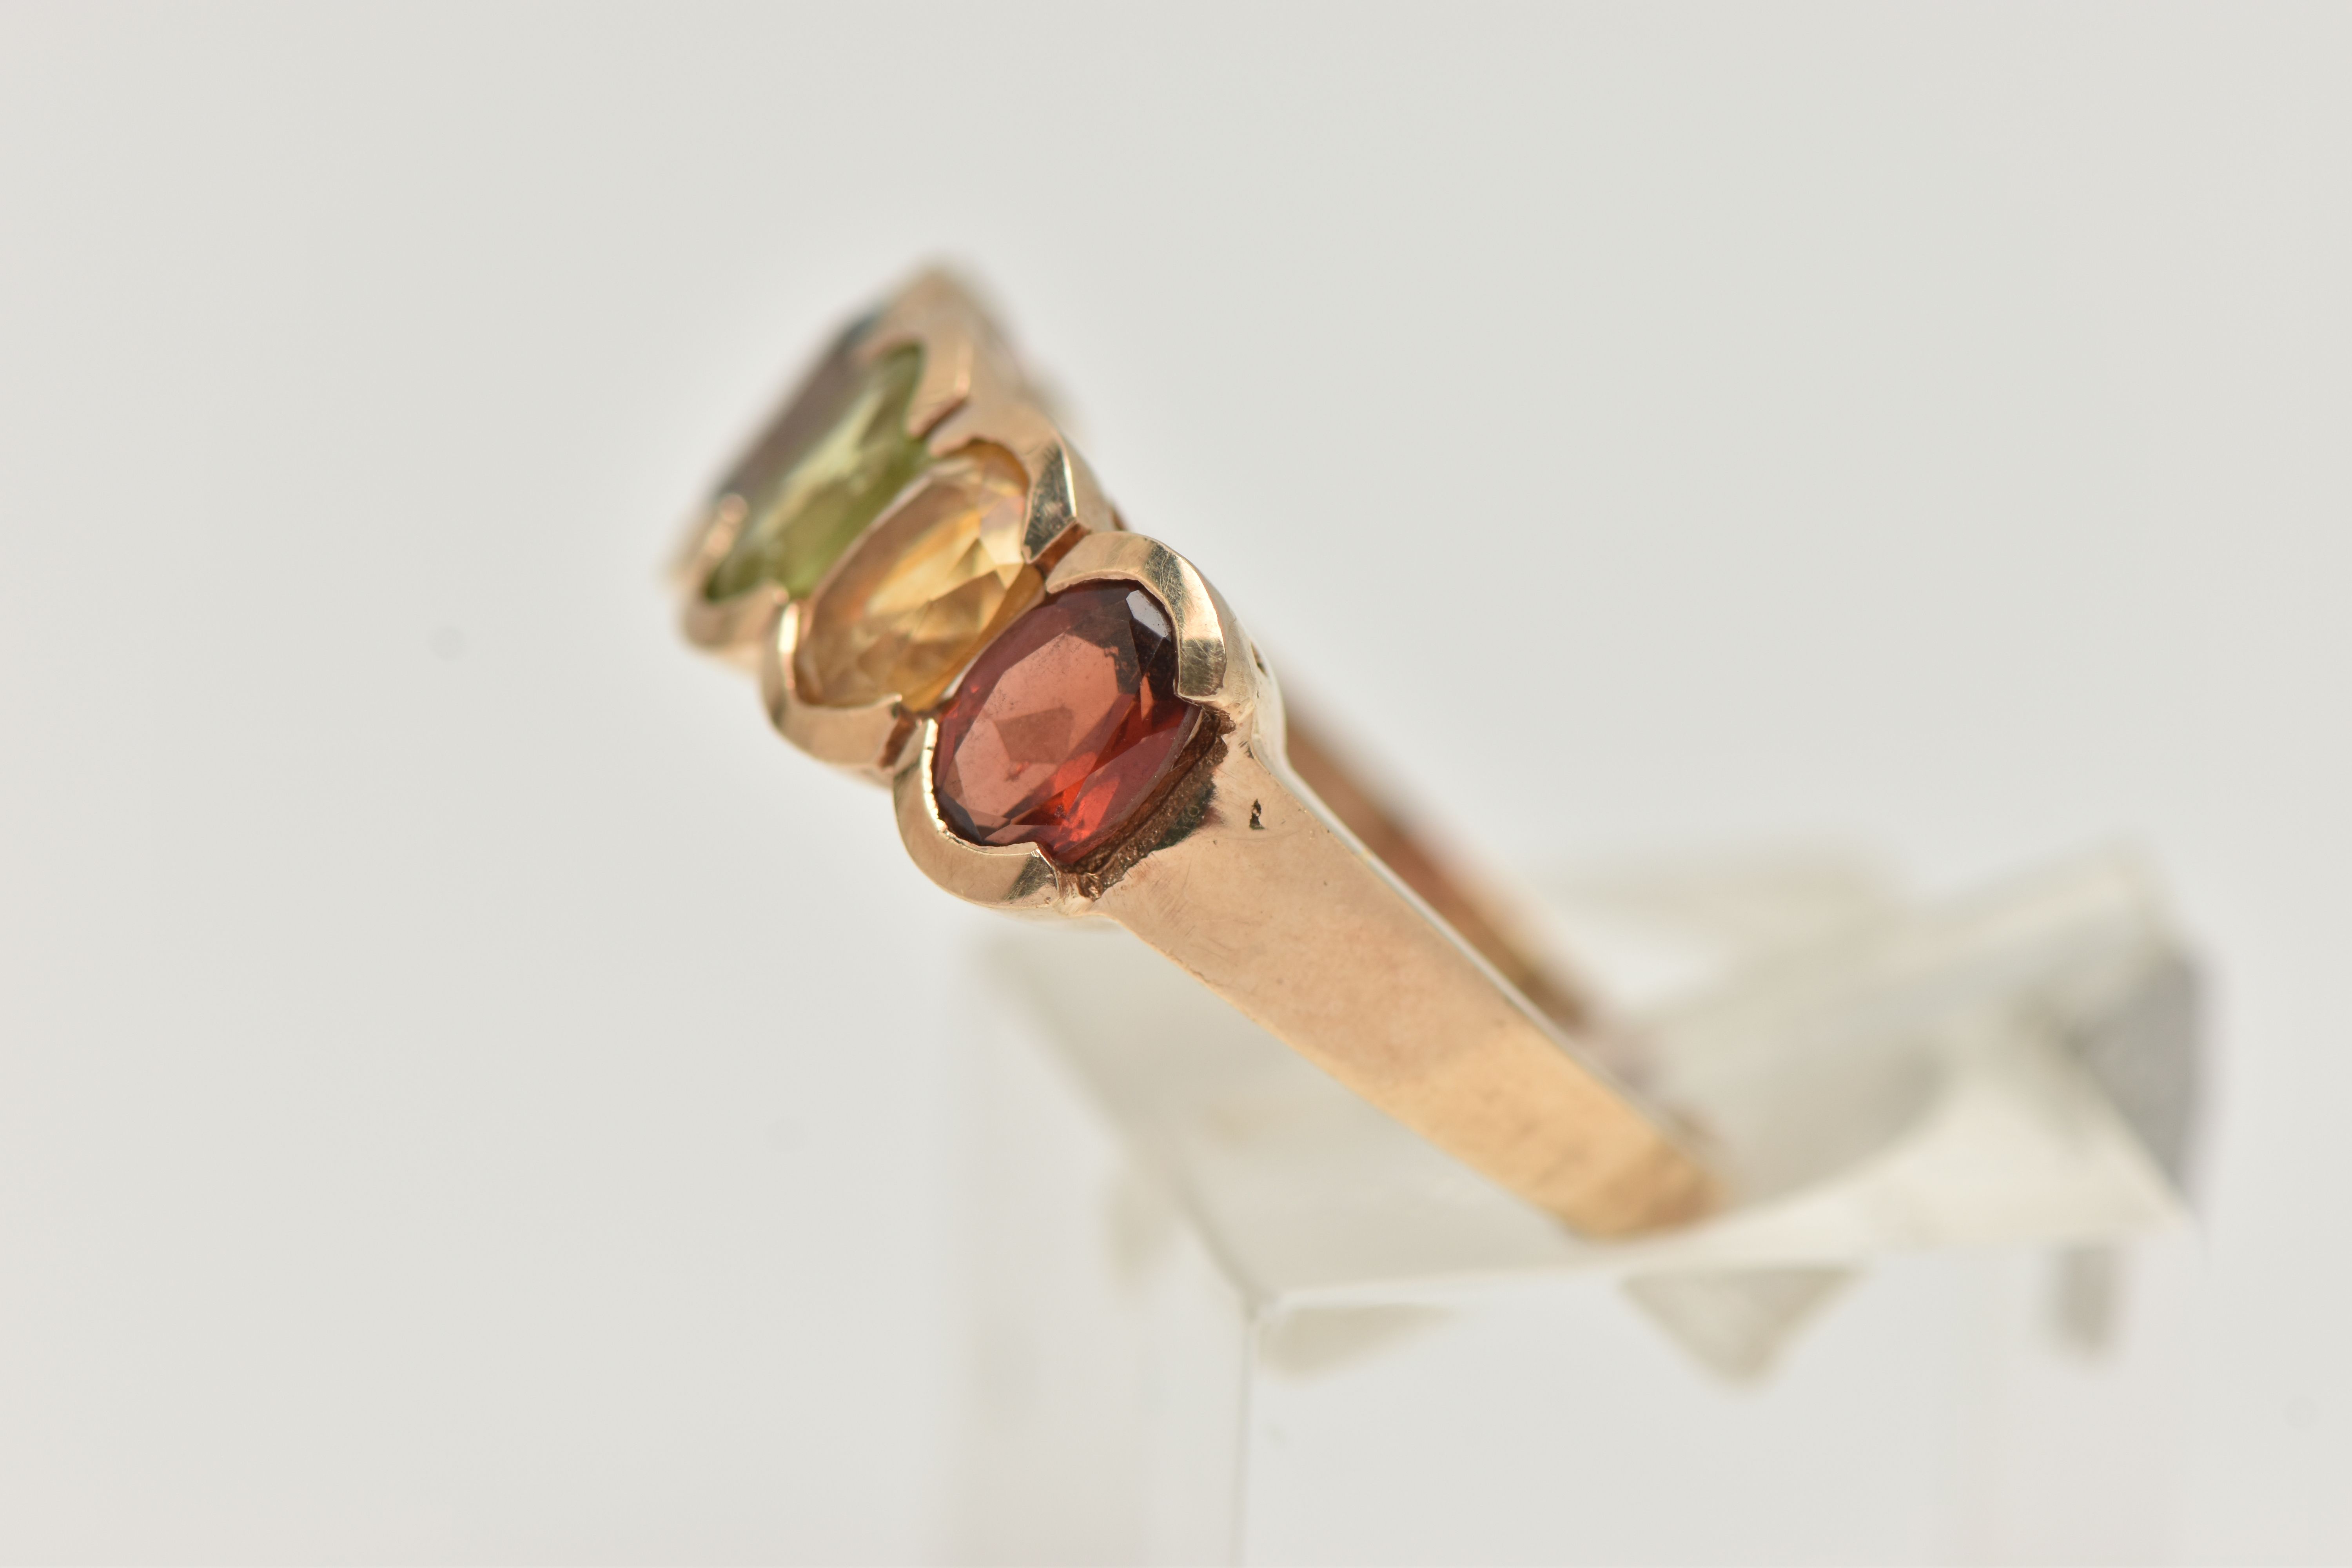 A 9CT GOLD MULTI GEM SET RING, designed as a row of five oval cut stones to include garnet, citrine, - Image 2 of 4